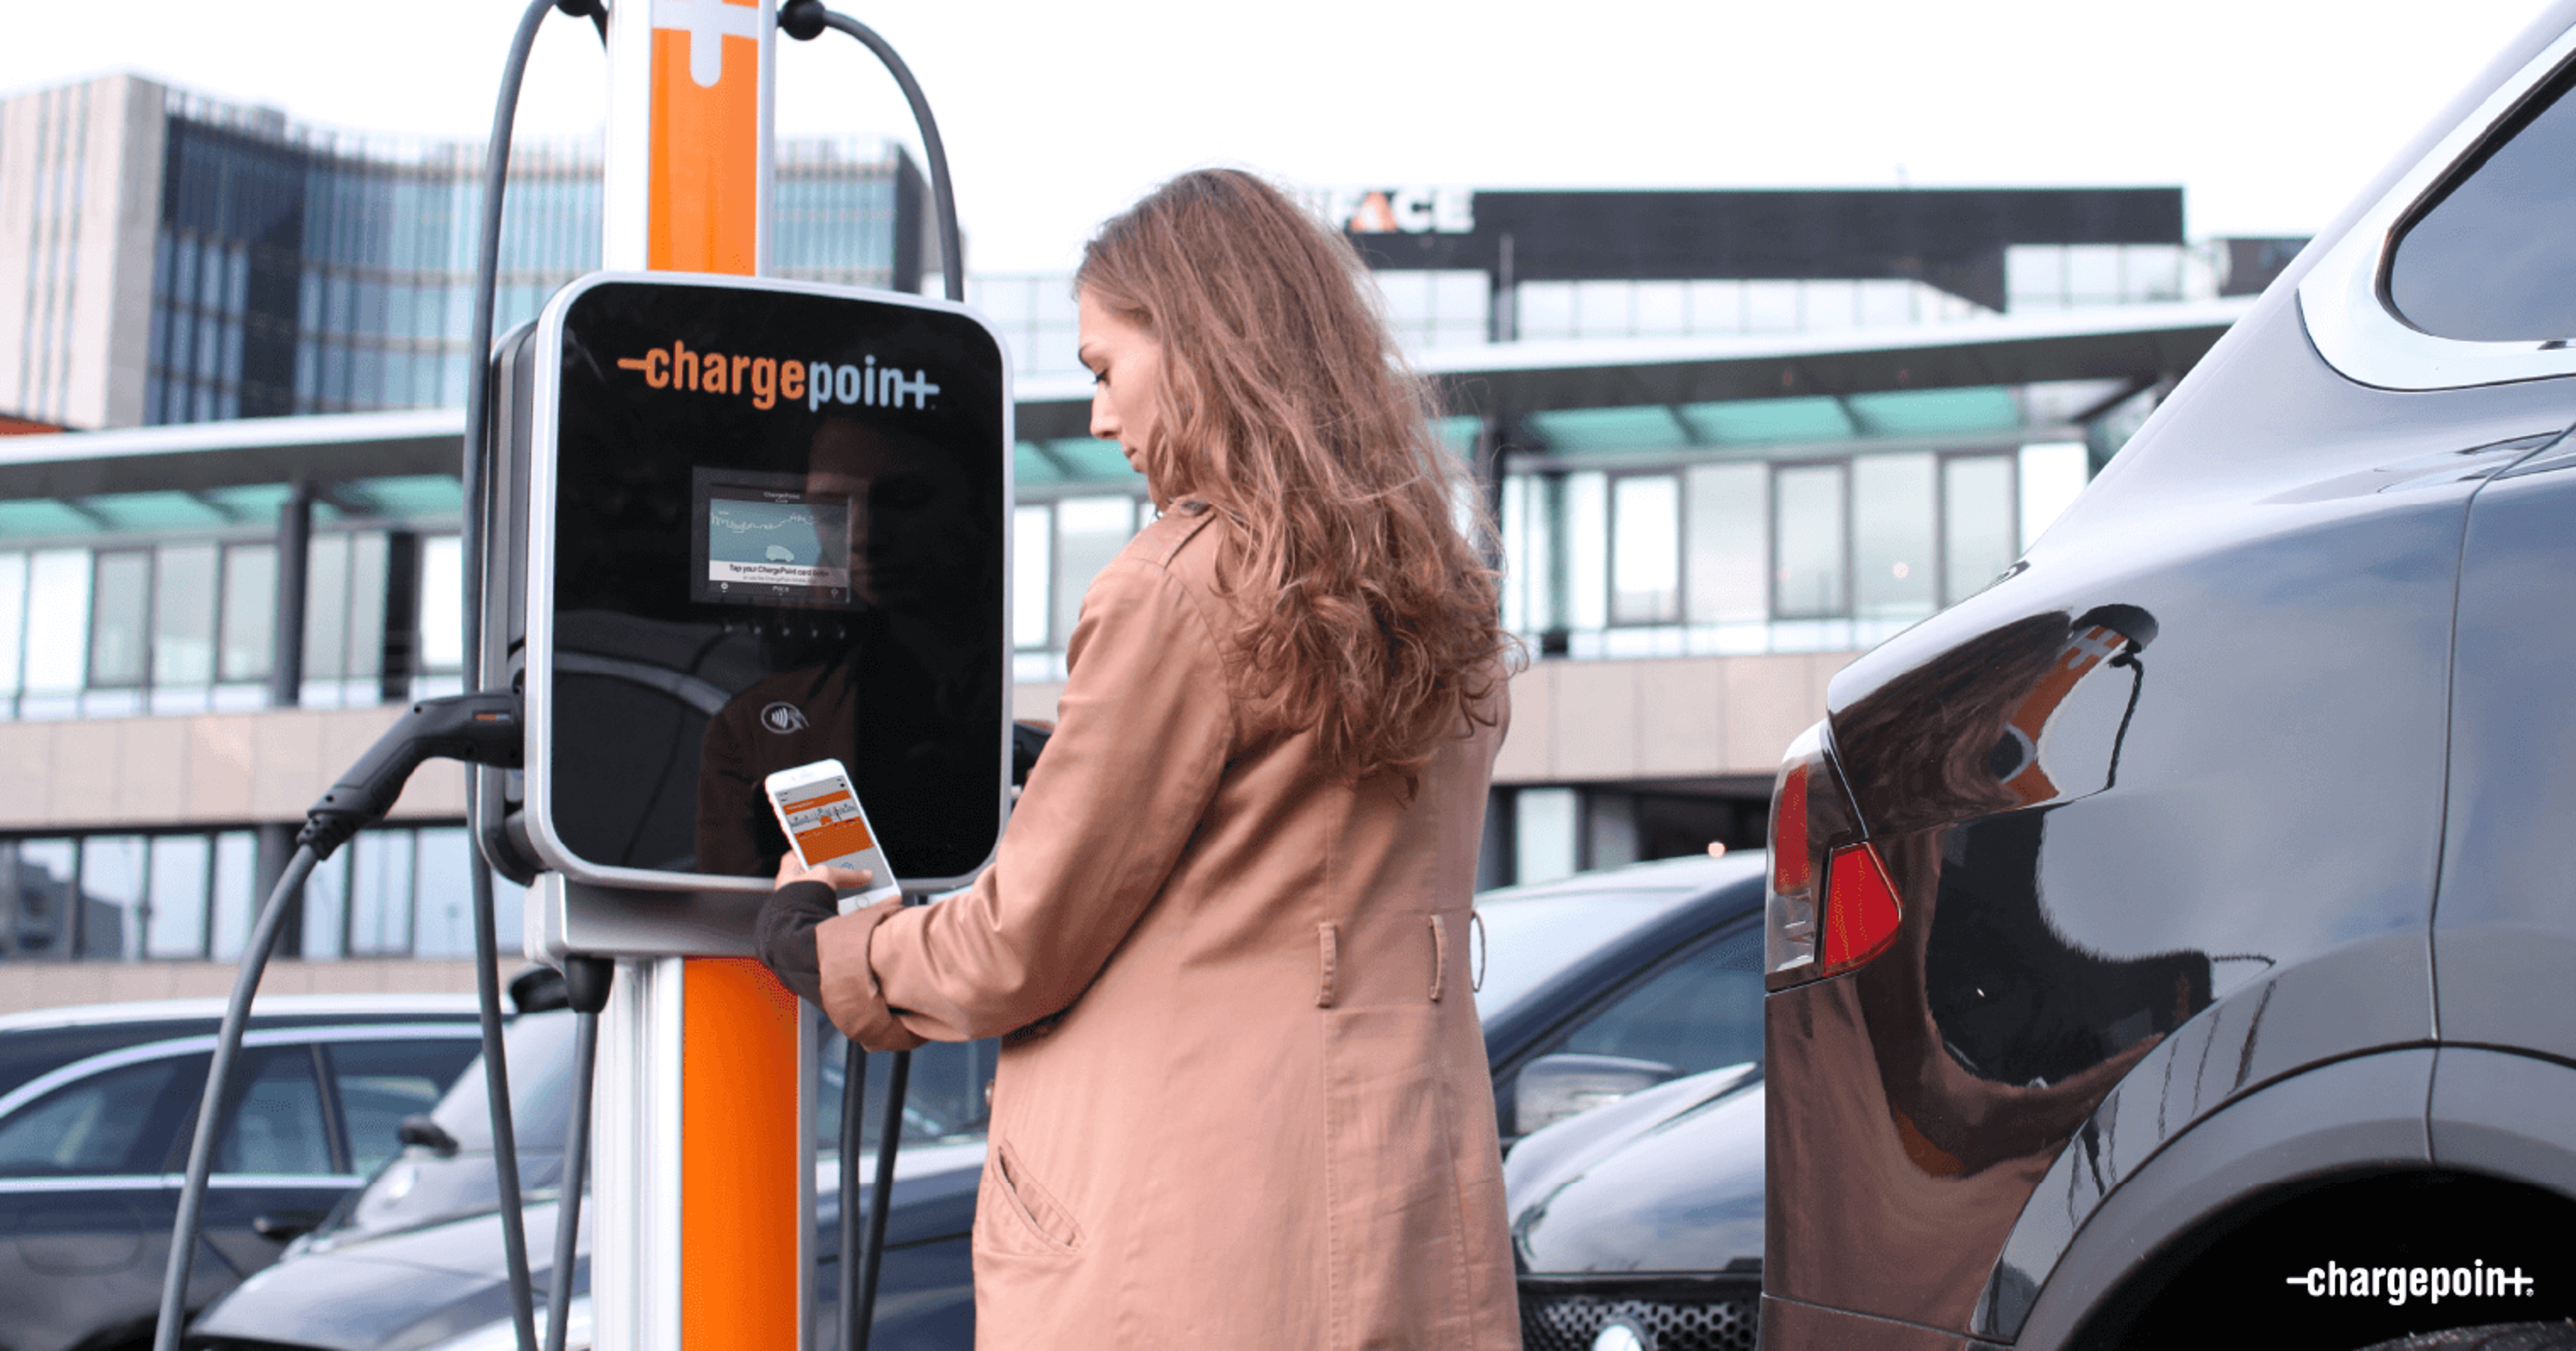 ChargePoint Analysts Term Q4 As Impressive, See Scope For Upside To Robust Guidance